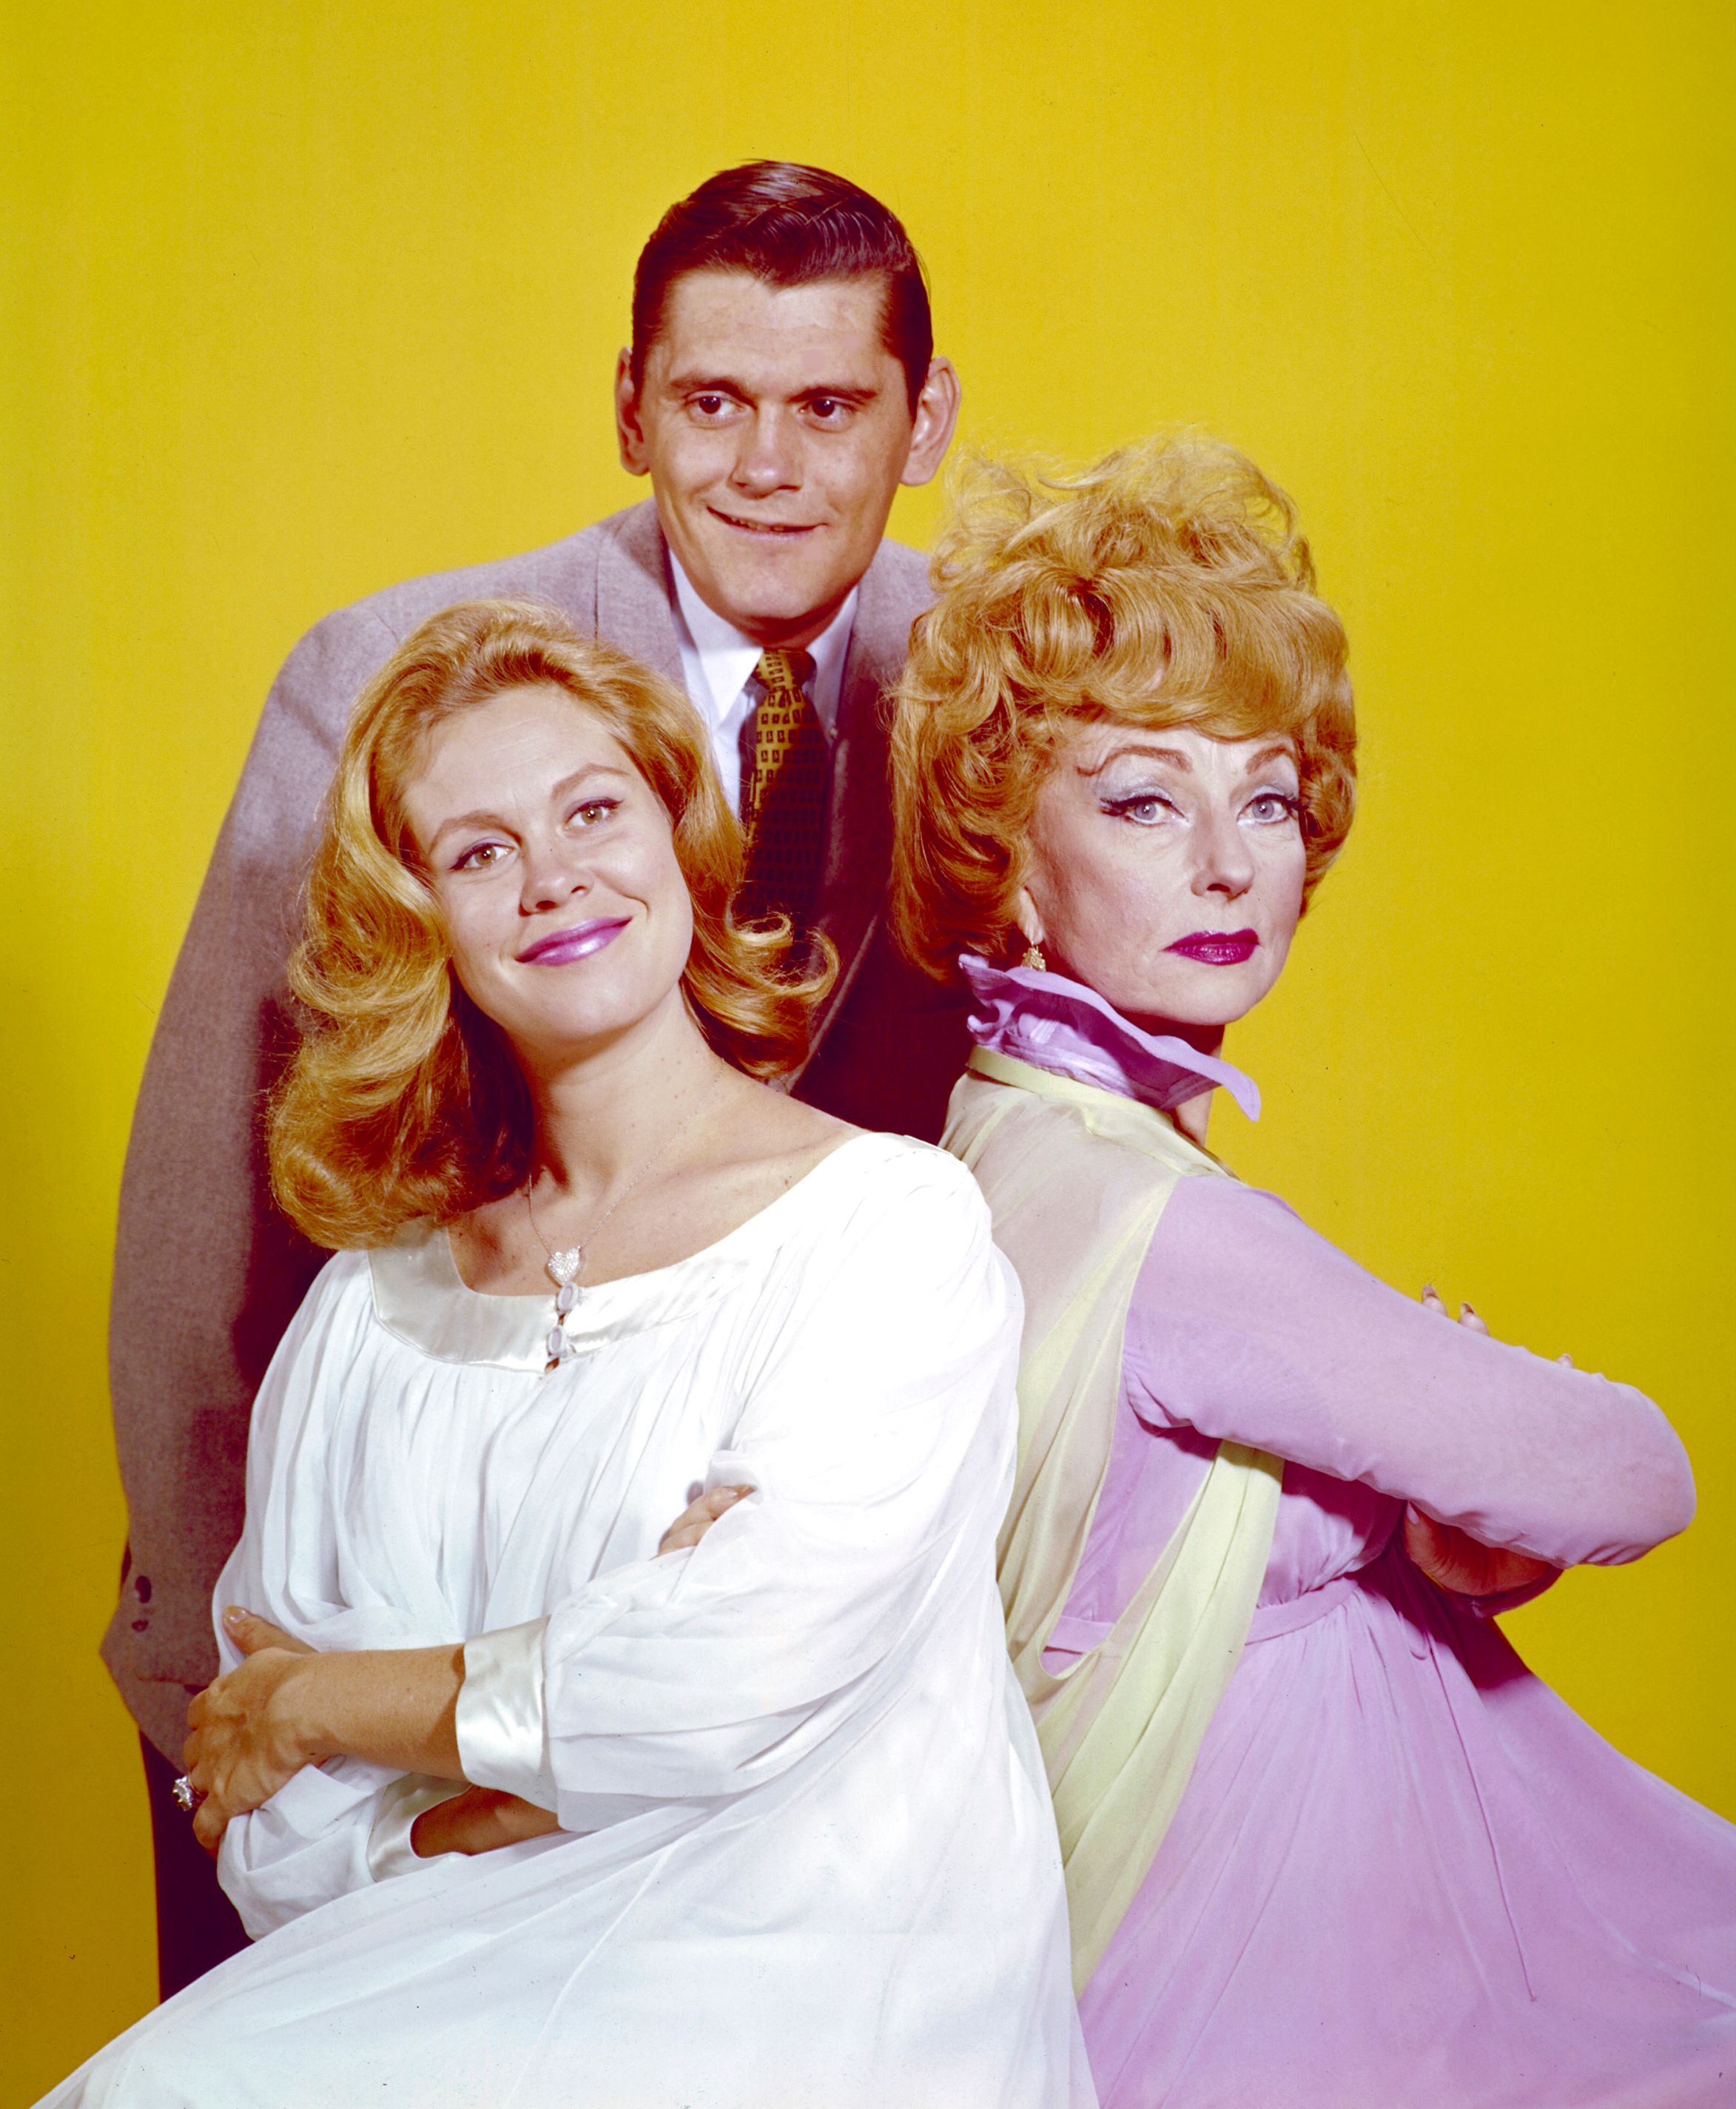 A portrait of Dick York, Elizabeth Montgomery, and Agnes Moorehead issued for television series, "Bewitched," circa 1969. | Photo: Getty Images